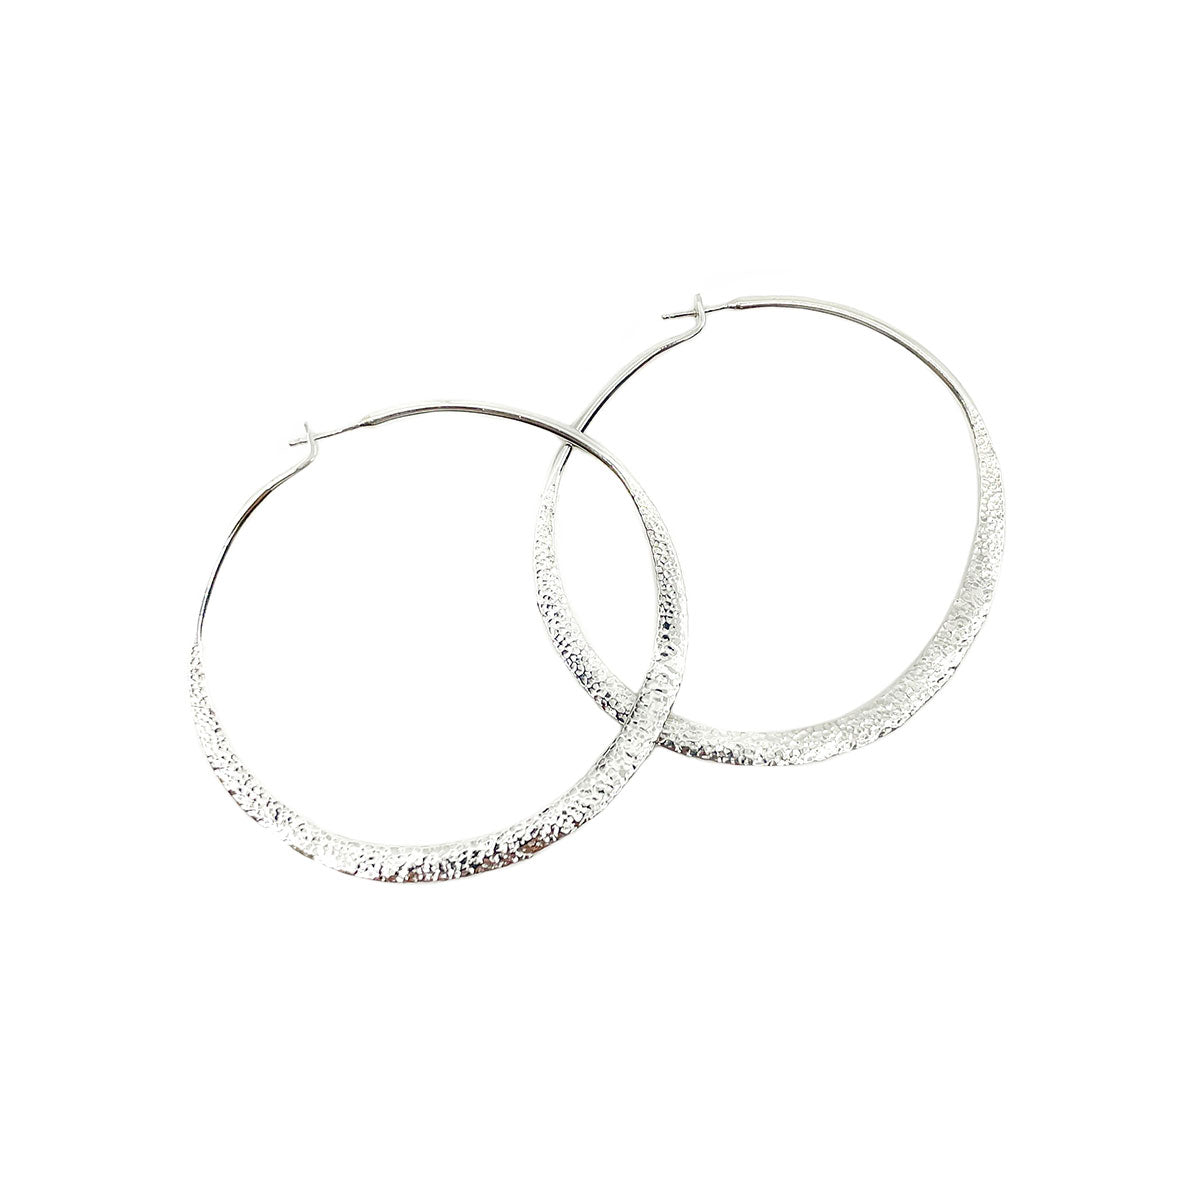 Sterling silver hand hammered and textured, wavy hoop earrings by Elgin Tom Sterling silver posts  Approximate dimensions: Hoops are 2.25 inches in diameter and just shy of 1/4 of an inch wide at widest flat area on bottom of hoop